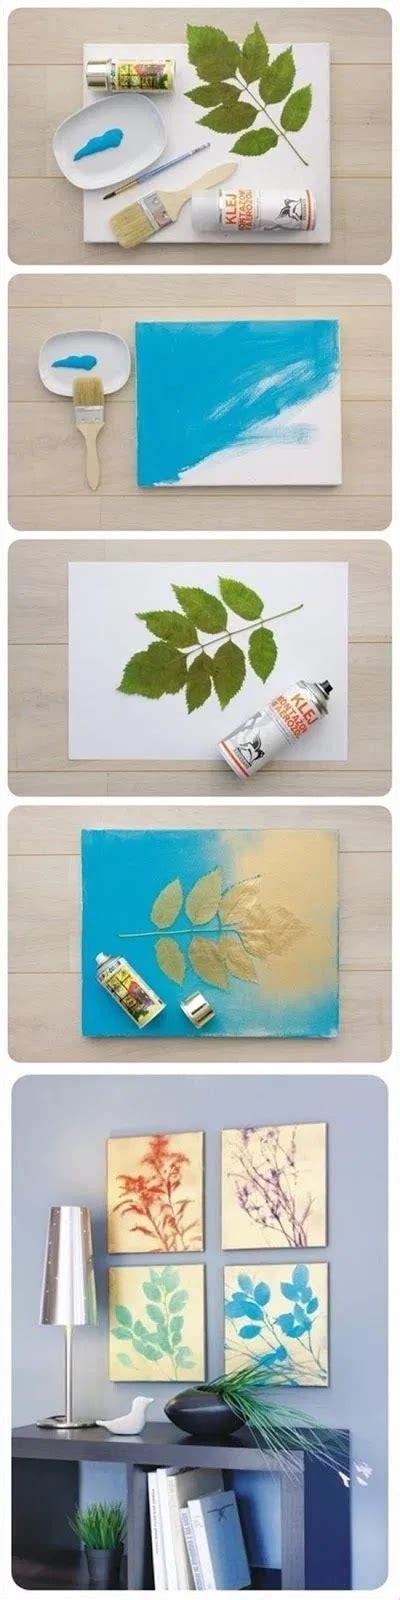 20 Extraordinary Smart Diy Paper Wall Decor Free Template Included